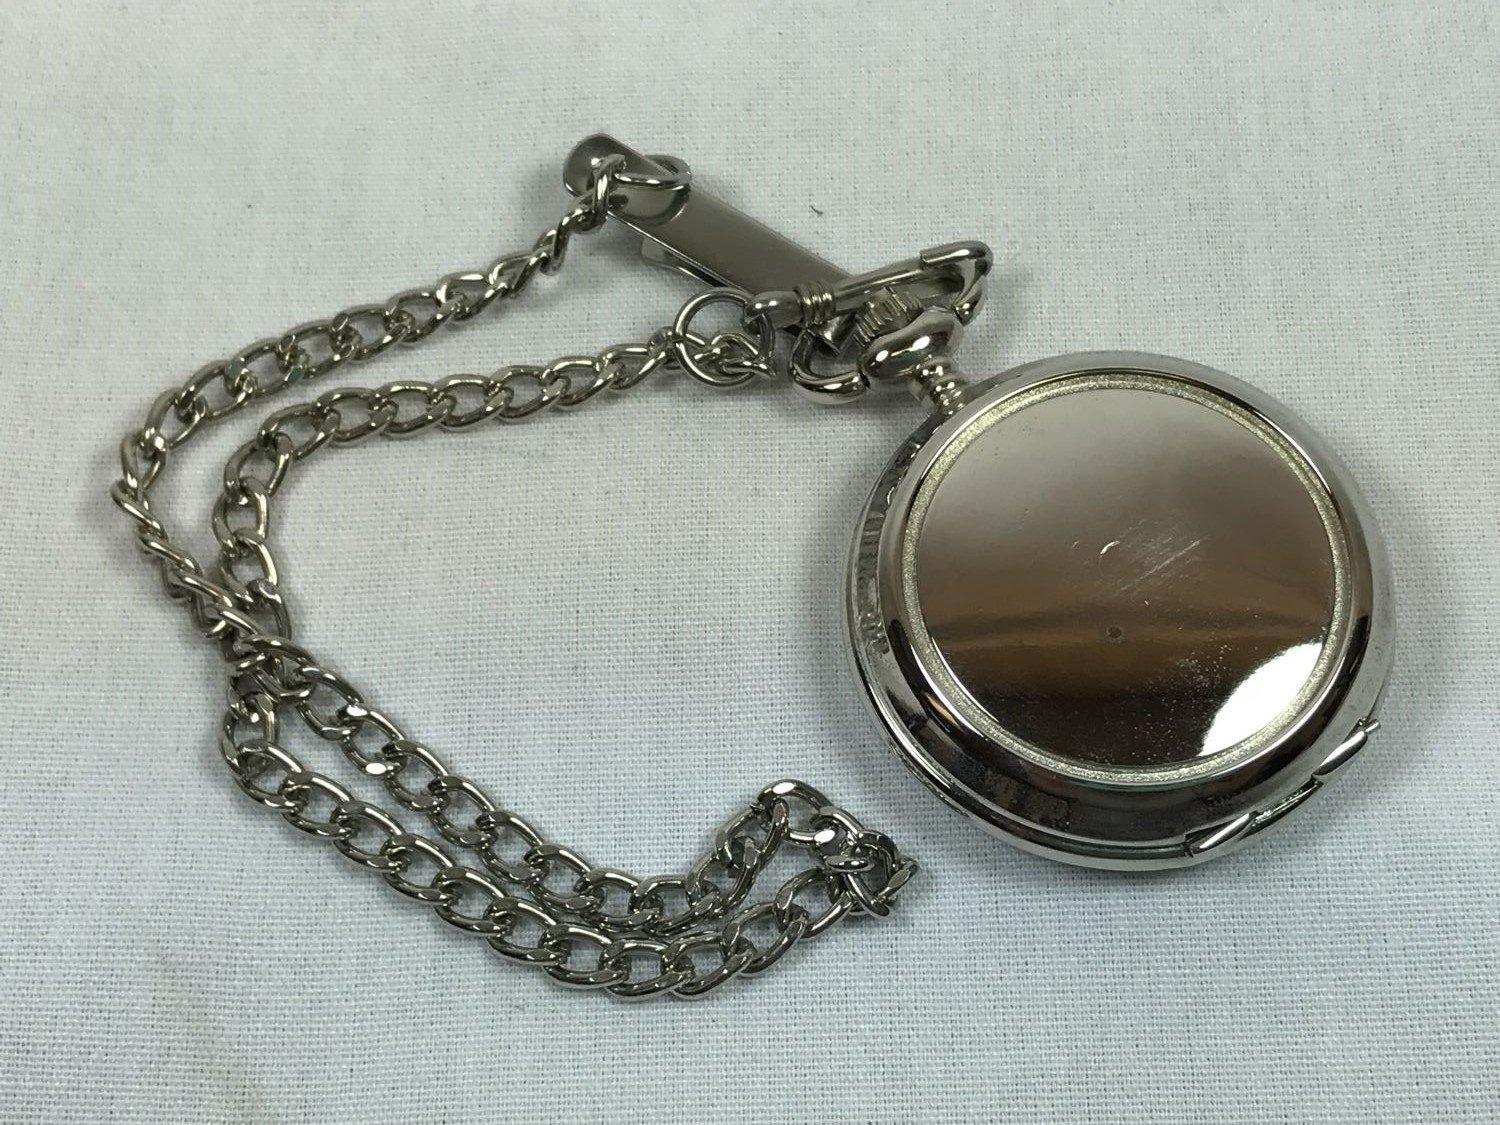 Al Agnew ''Majestic Morning'' Exclusive Edition pocket watch in collectible tin